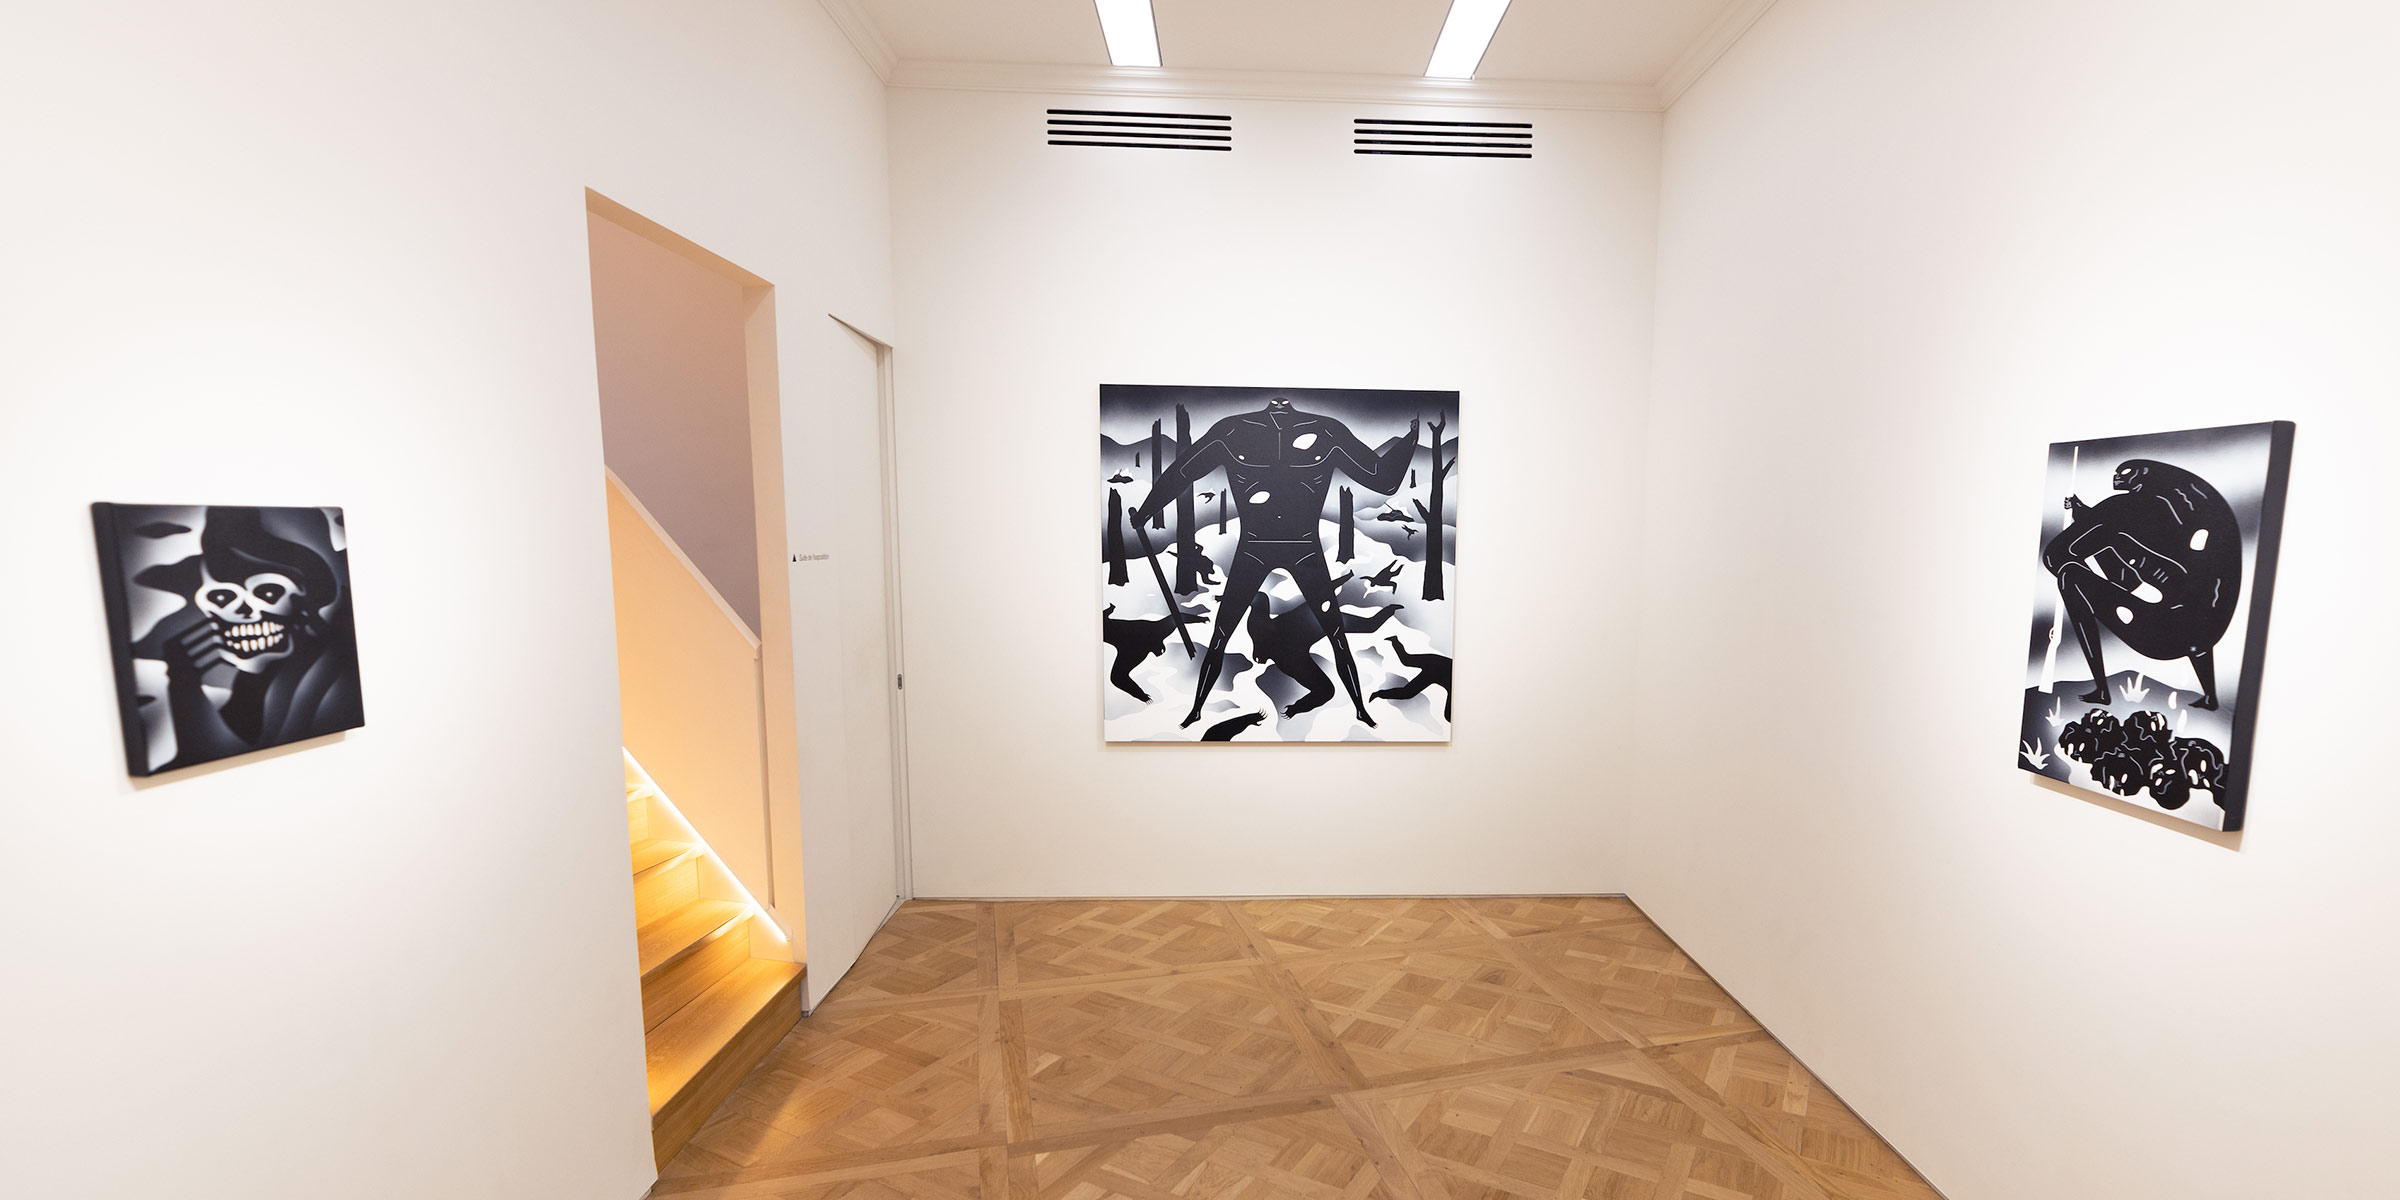 Cleon Peterson Cruelty with Over the influence Paris